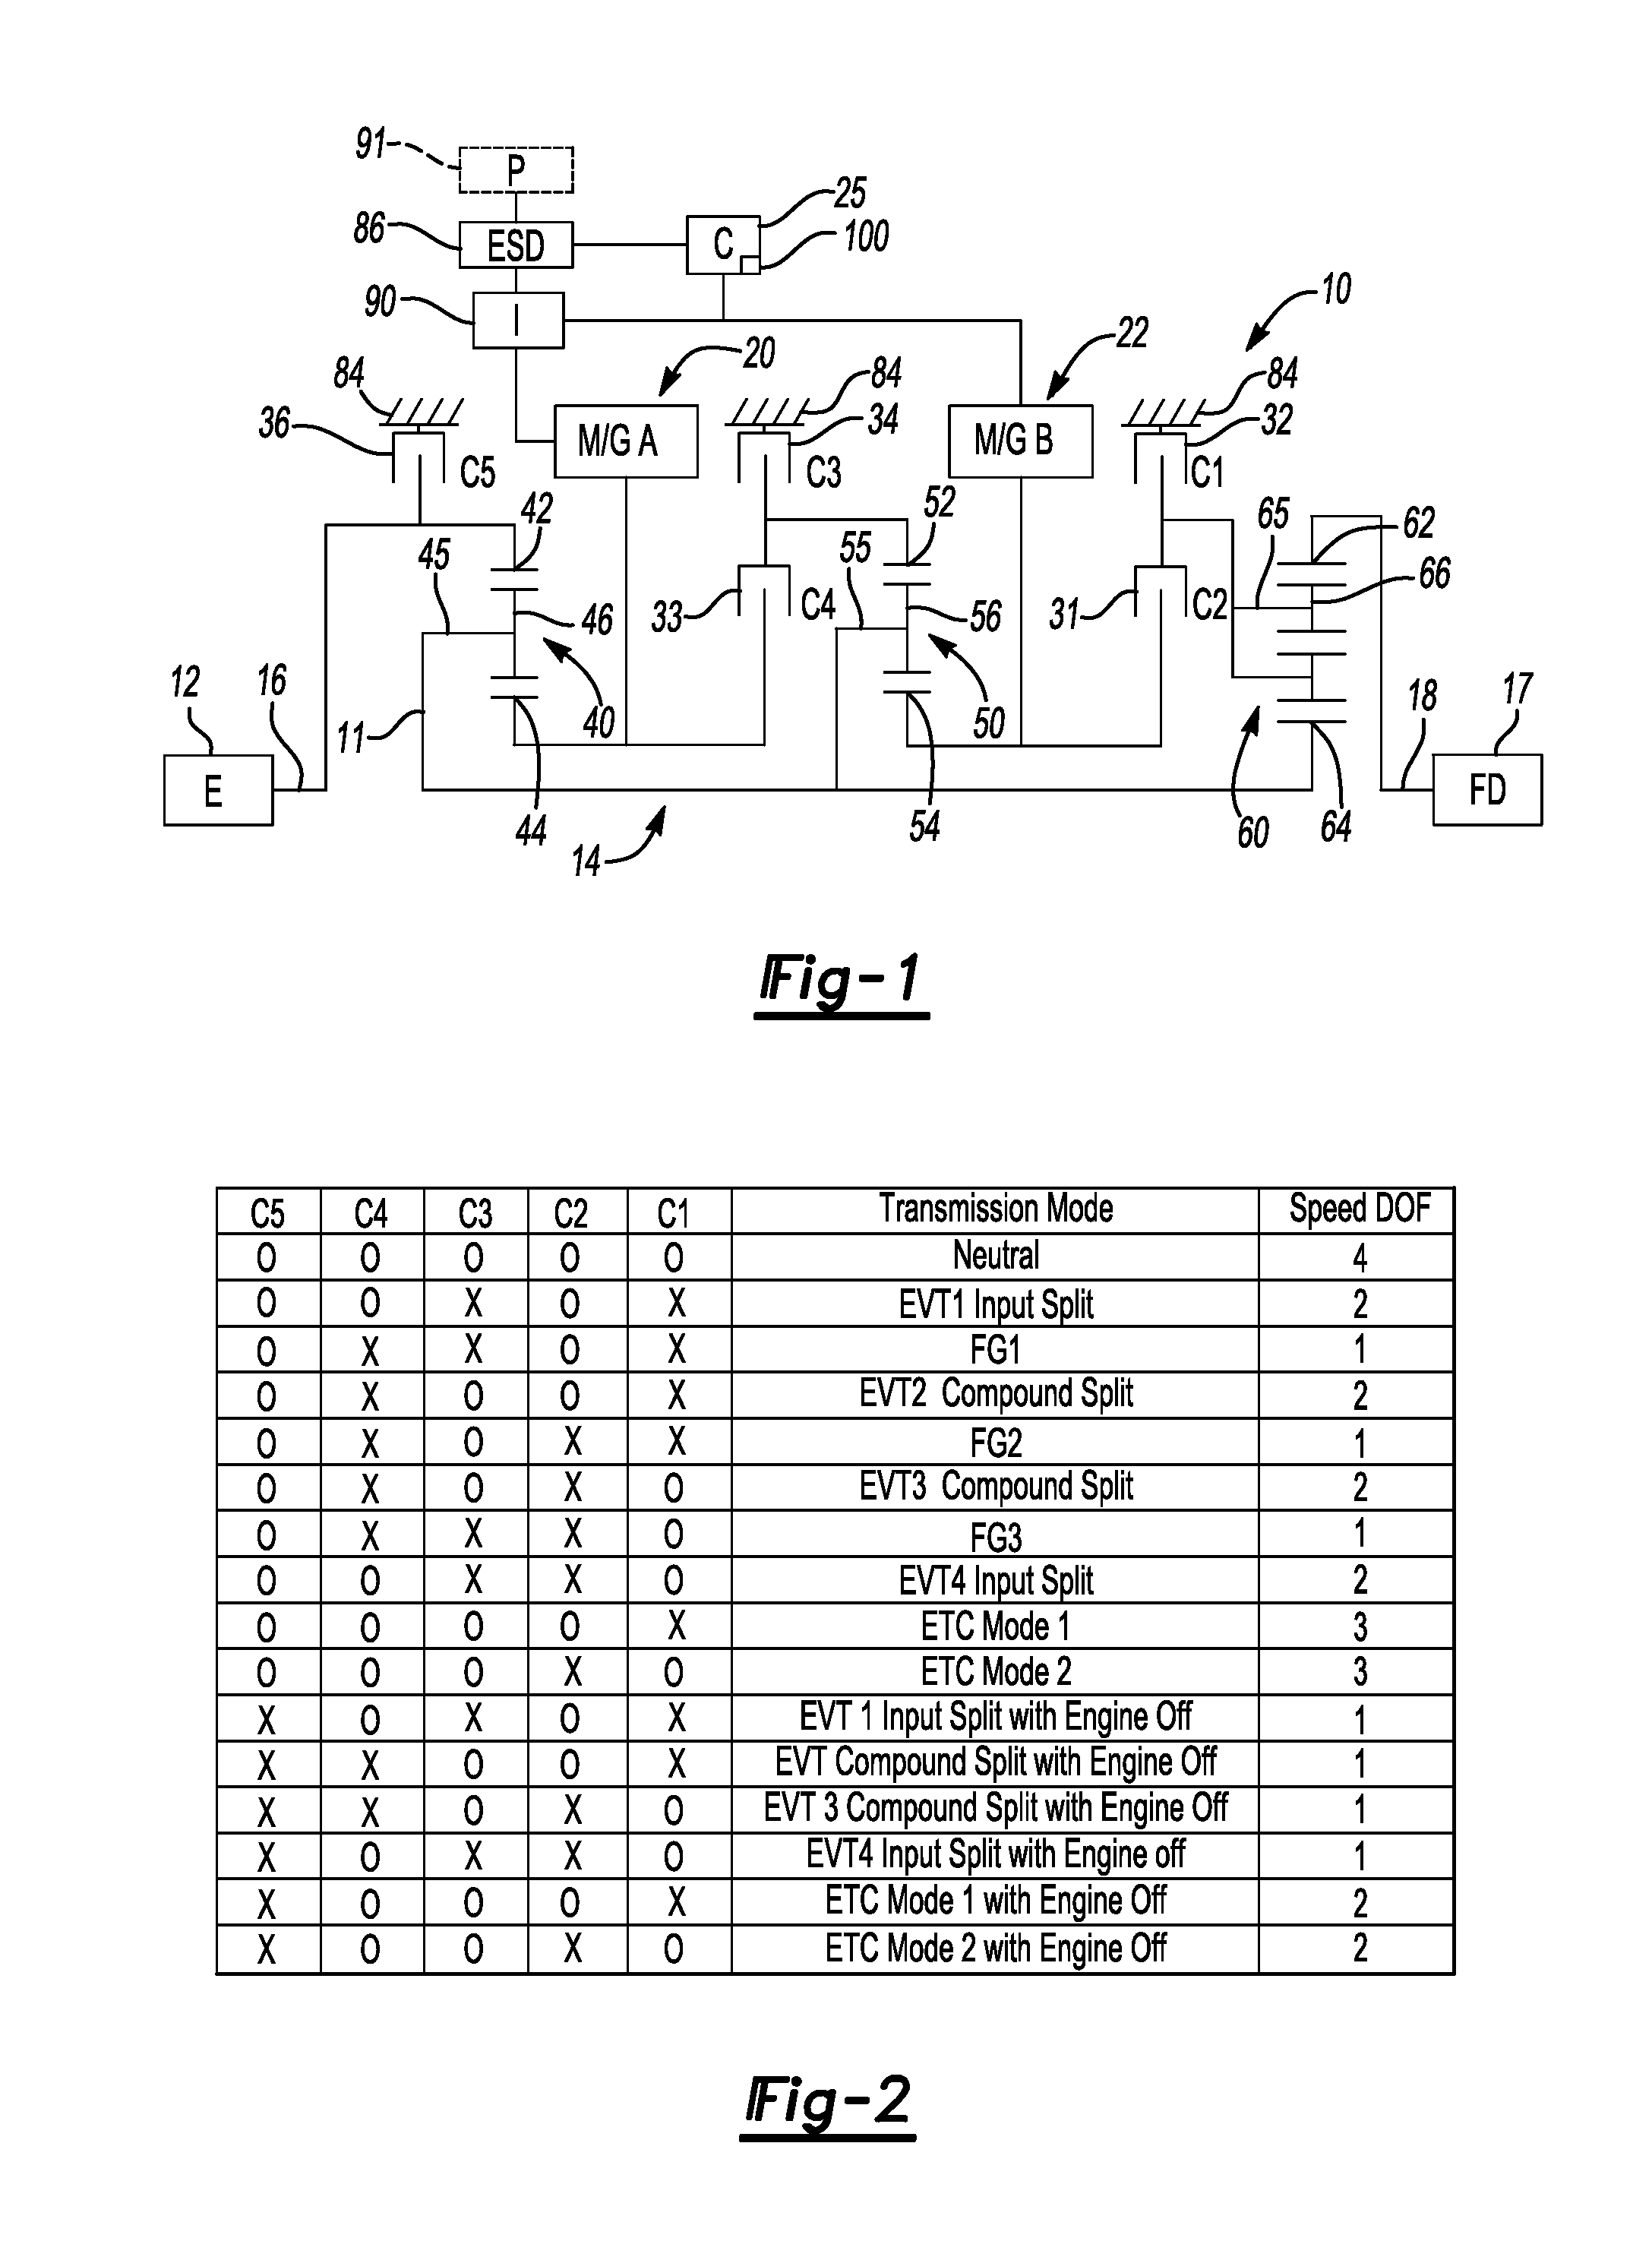 Method and Apparatus for Transitioning an Electrically Variable Transmission